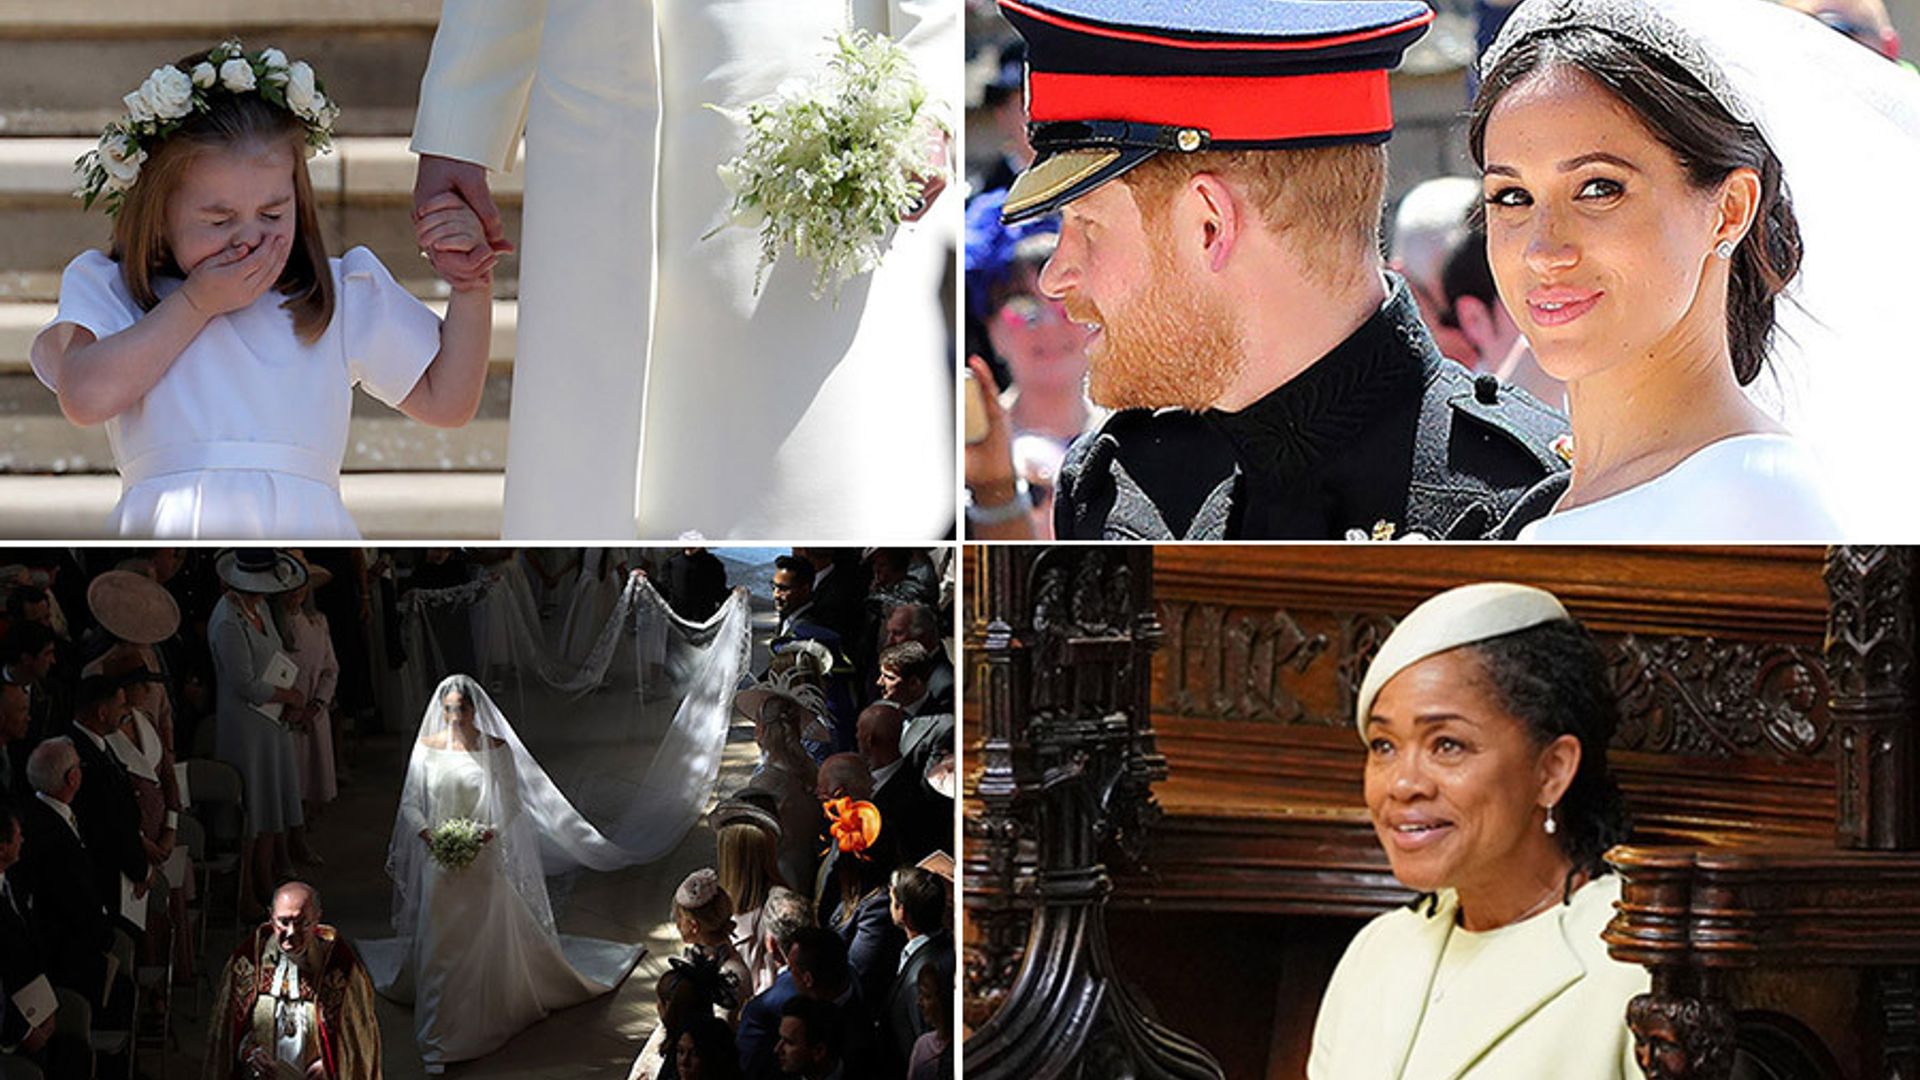 Picture perfect: The 10 most iconic images from Prince Harry and Meghan Markle's royal wedding